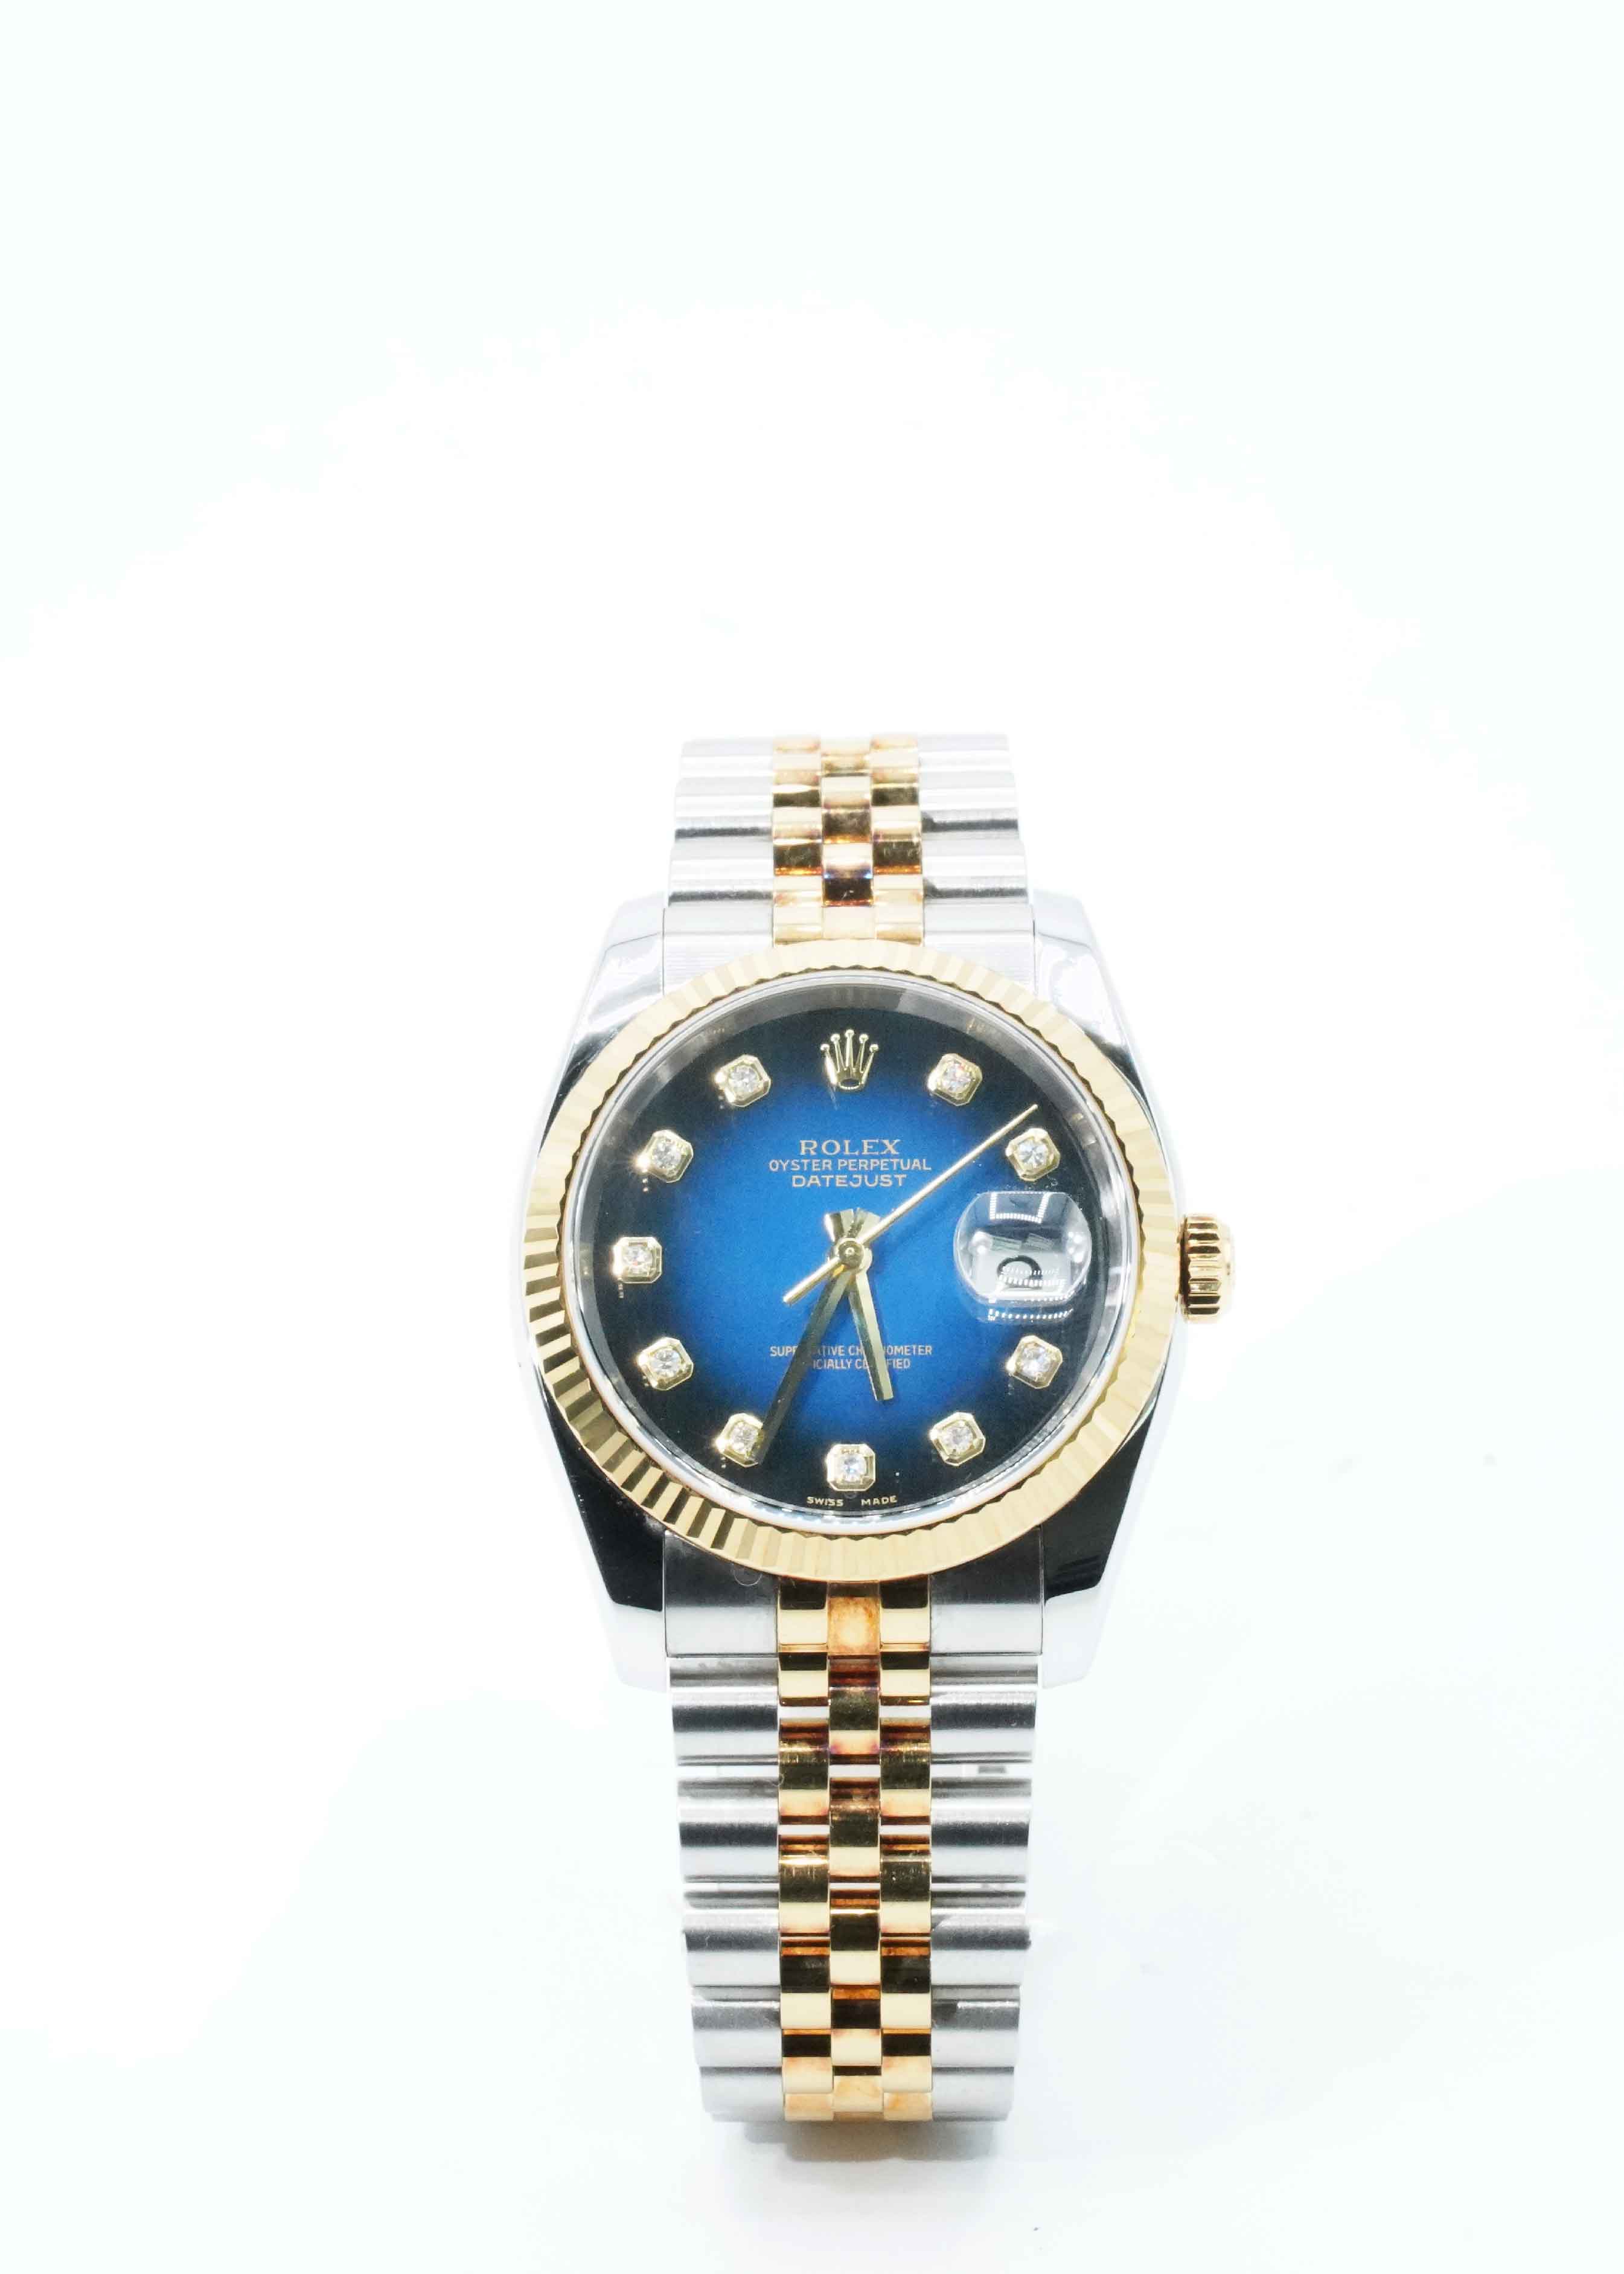 Rolex DateJust 36mm Watch 116233 Factory Blue Vignette *Papers and Tags*